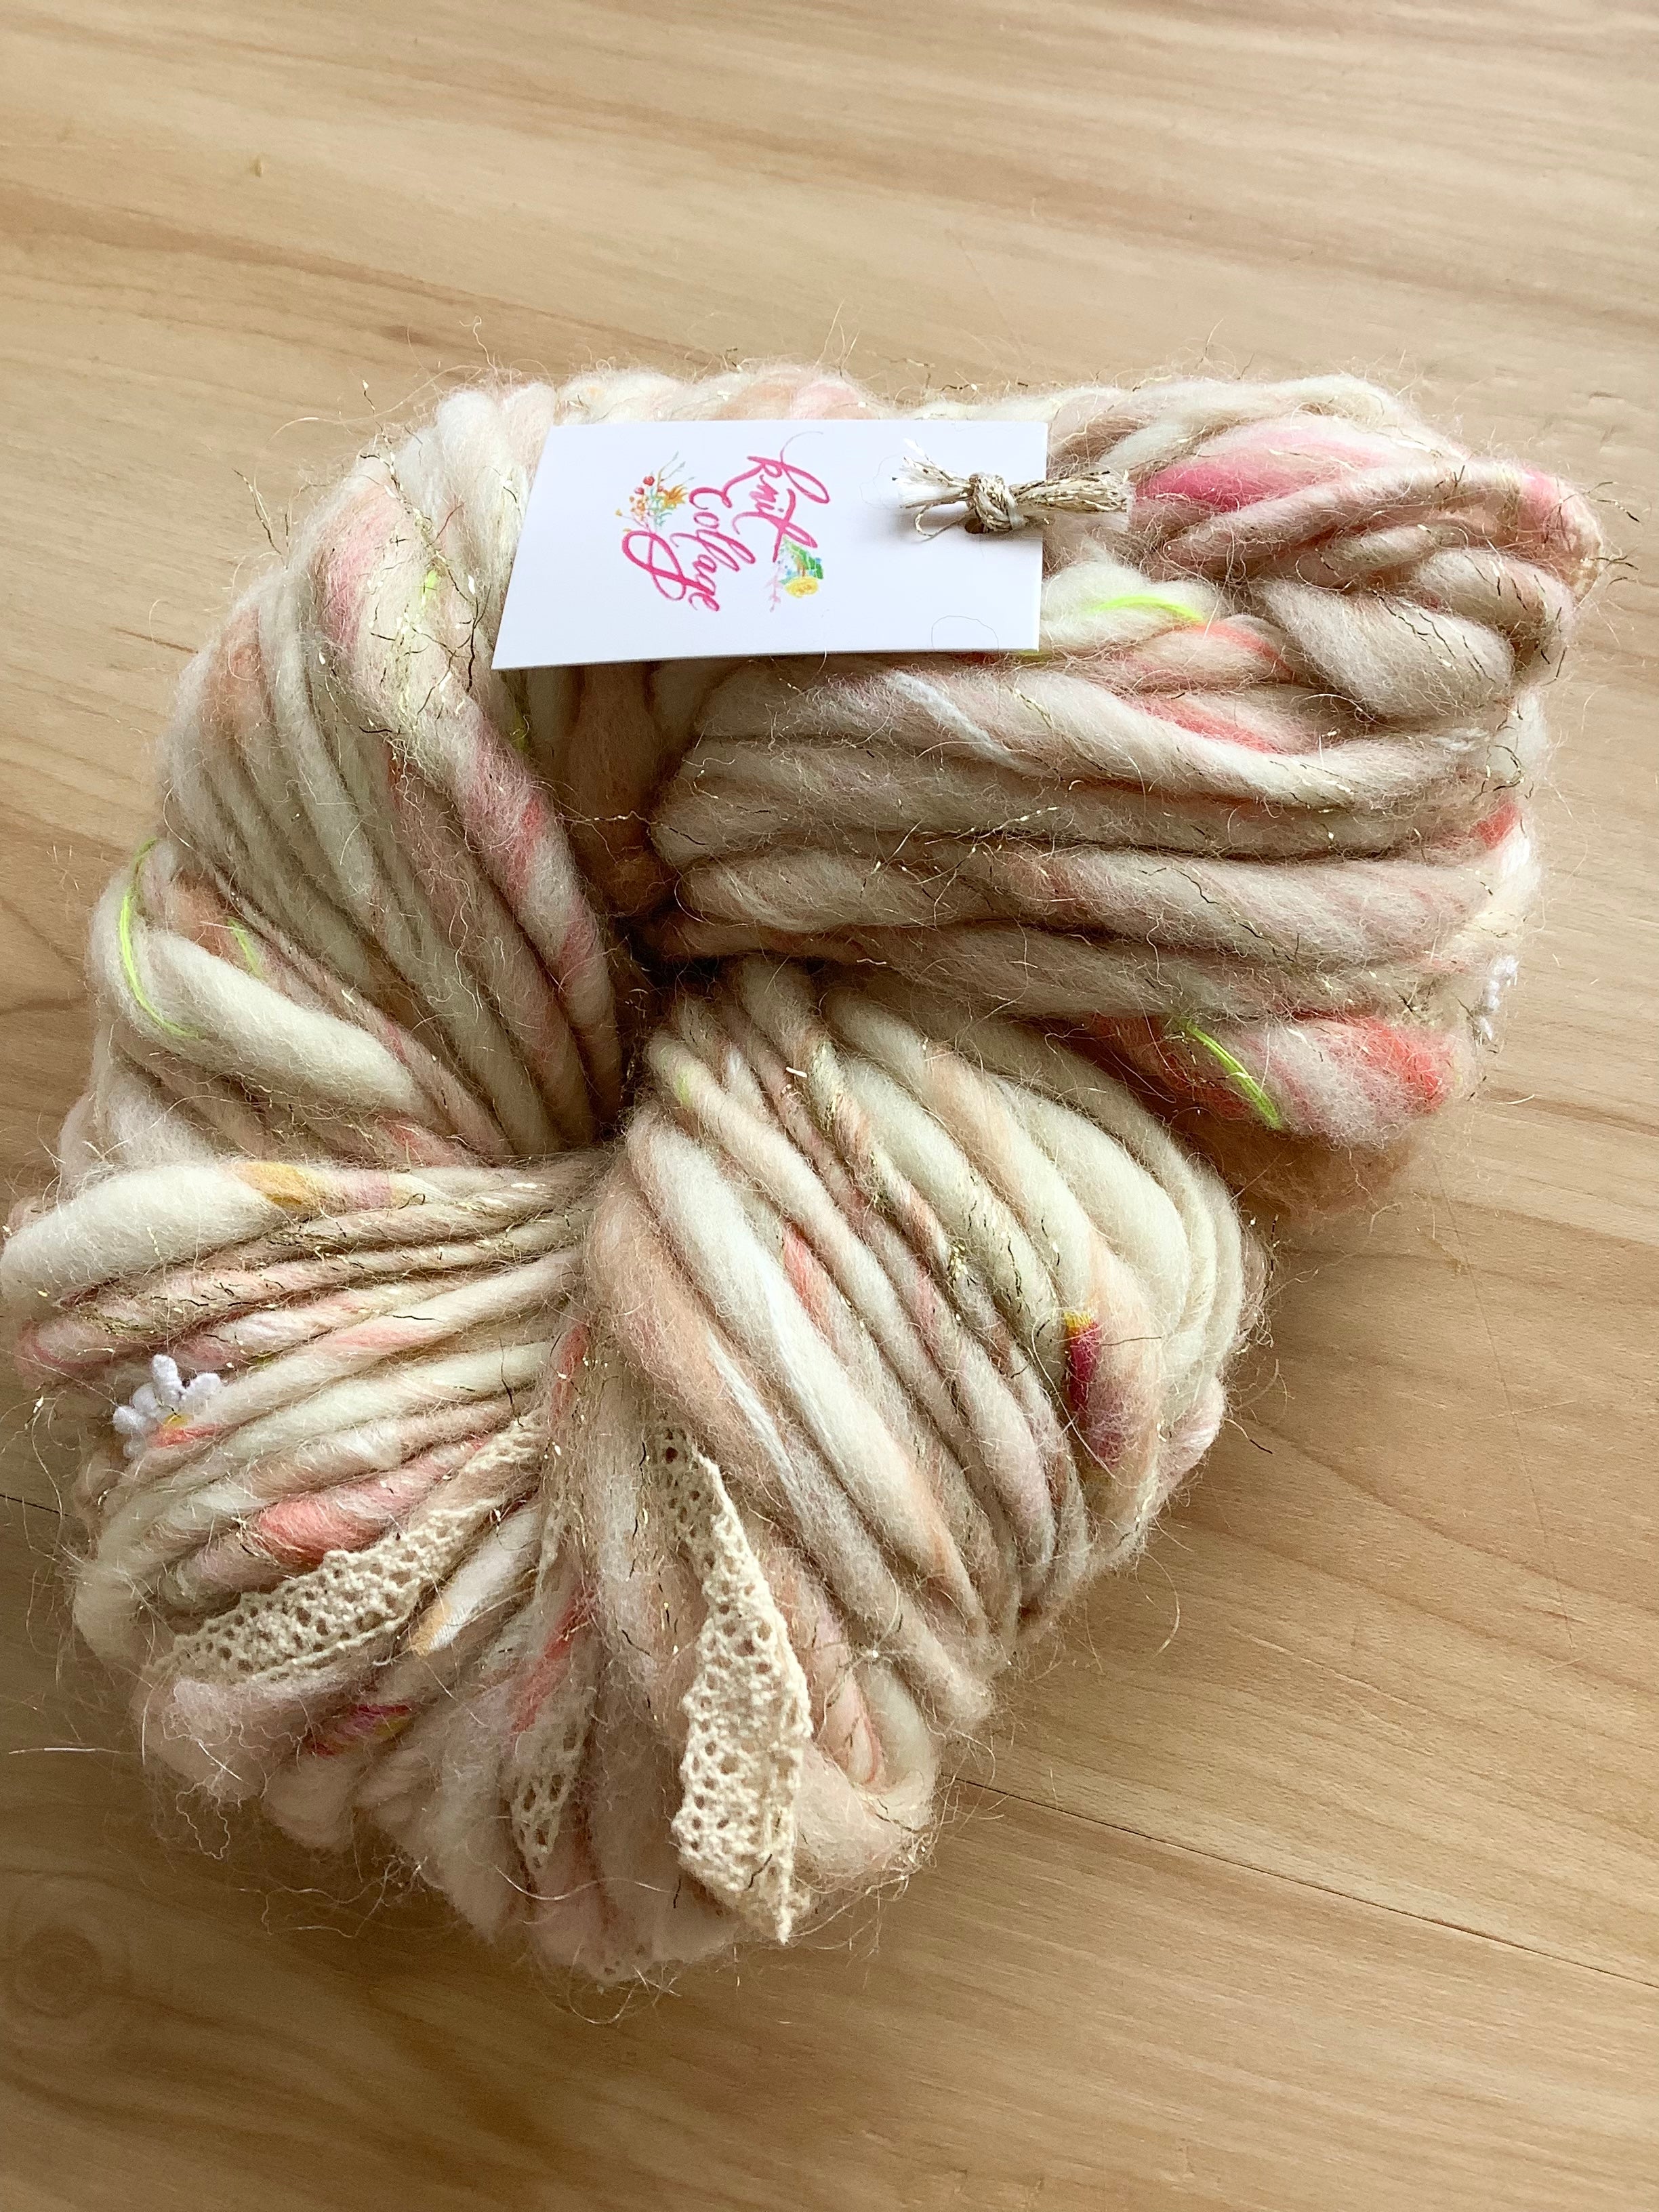 Natural Aura - Daisy Chain yarn from Knit Collage